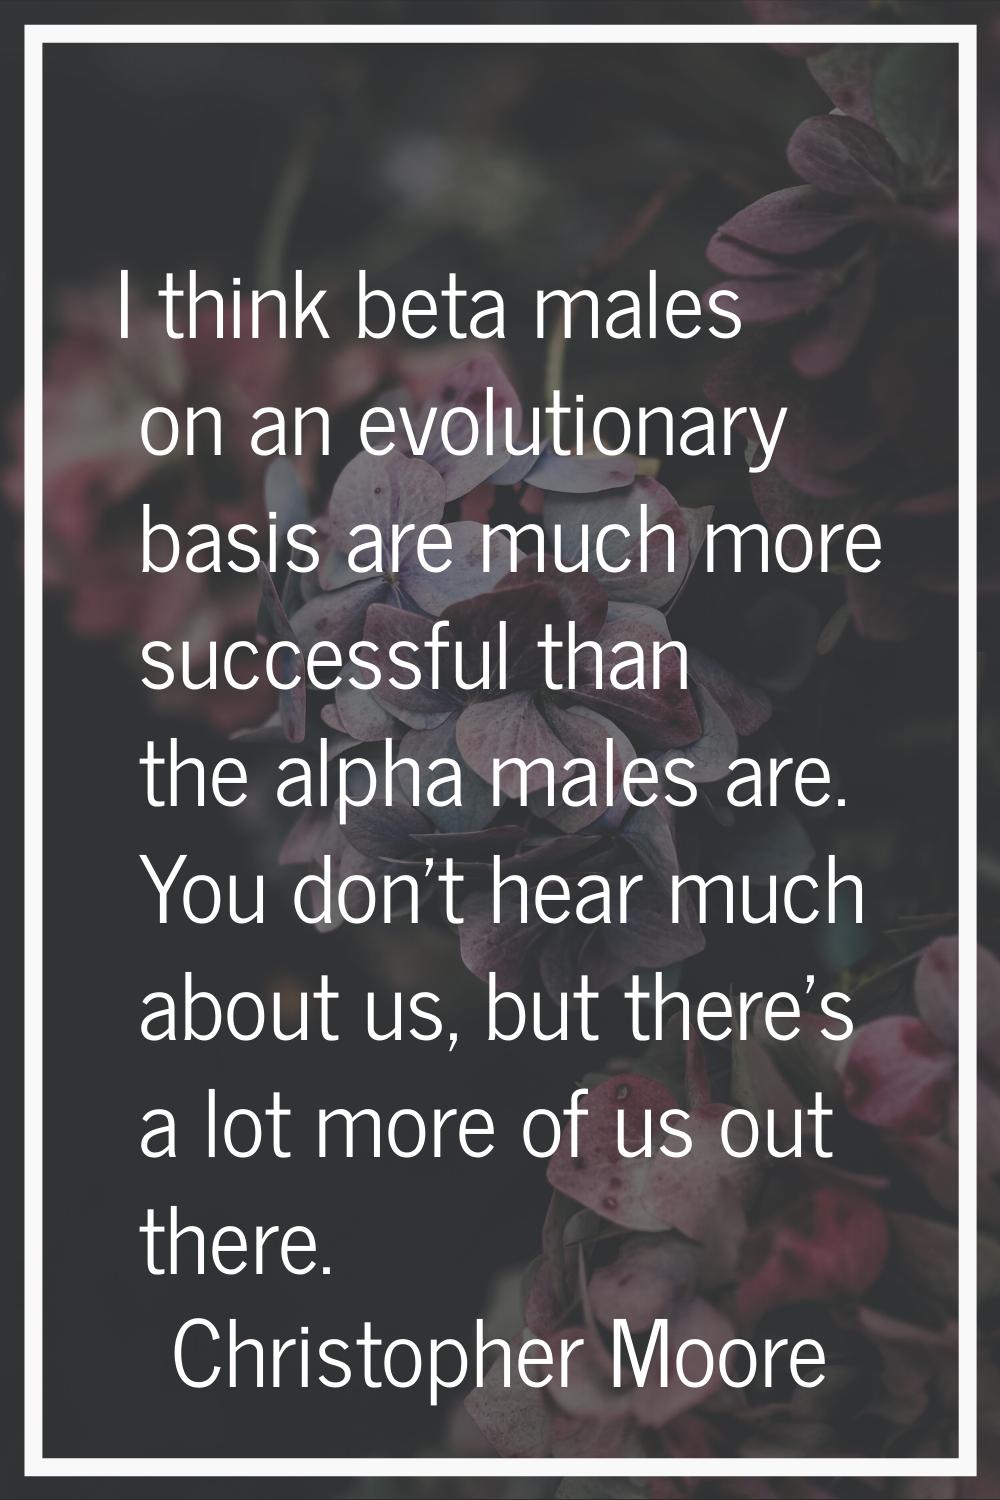 I think beta males on an evolutionary basis are much more successful than the alpha males are. You 